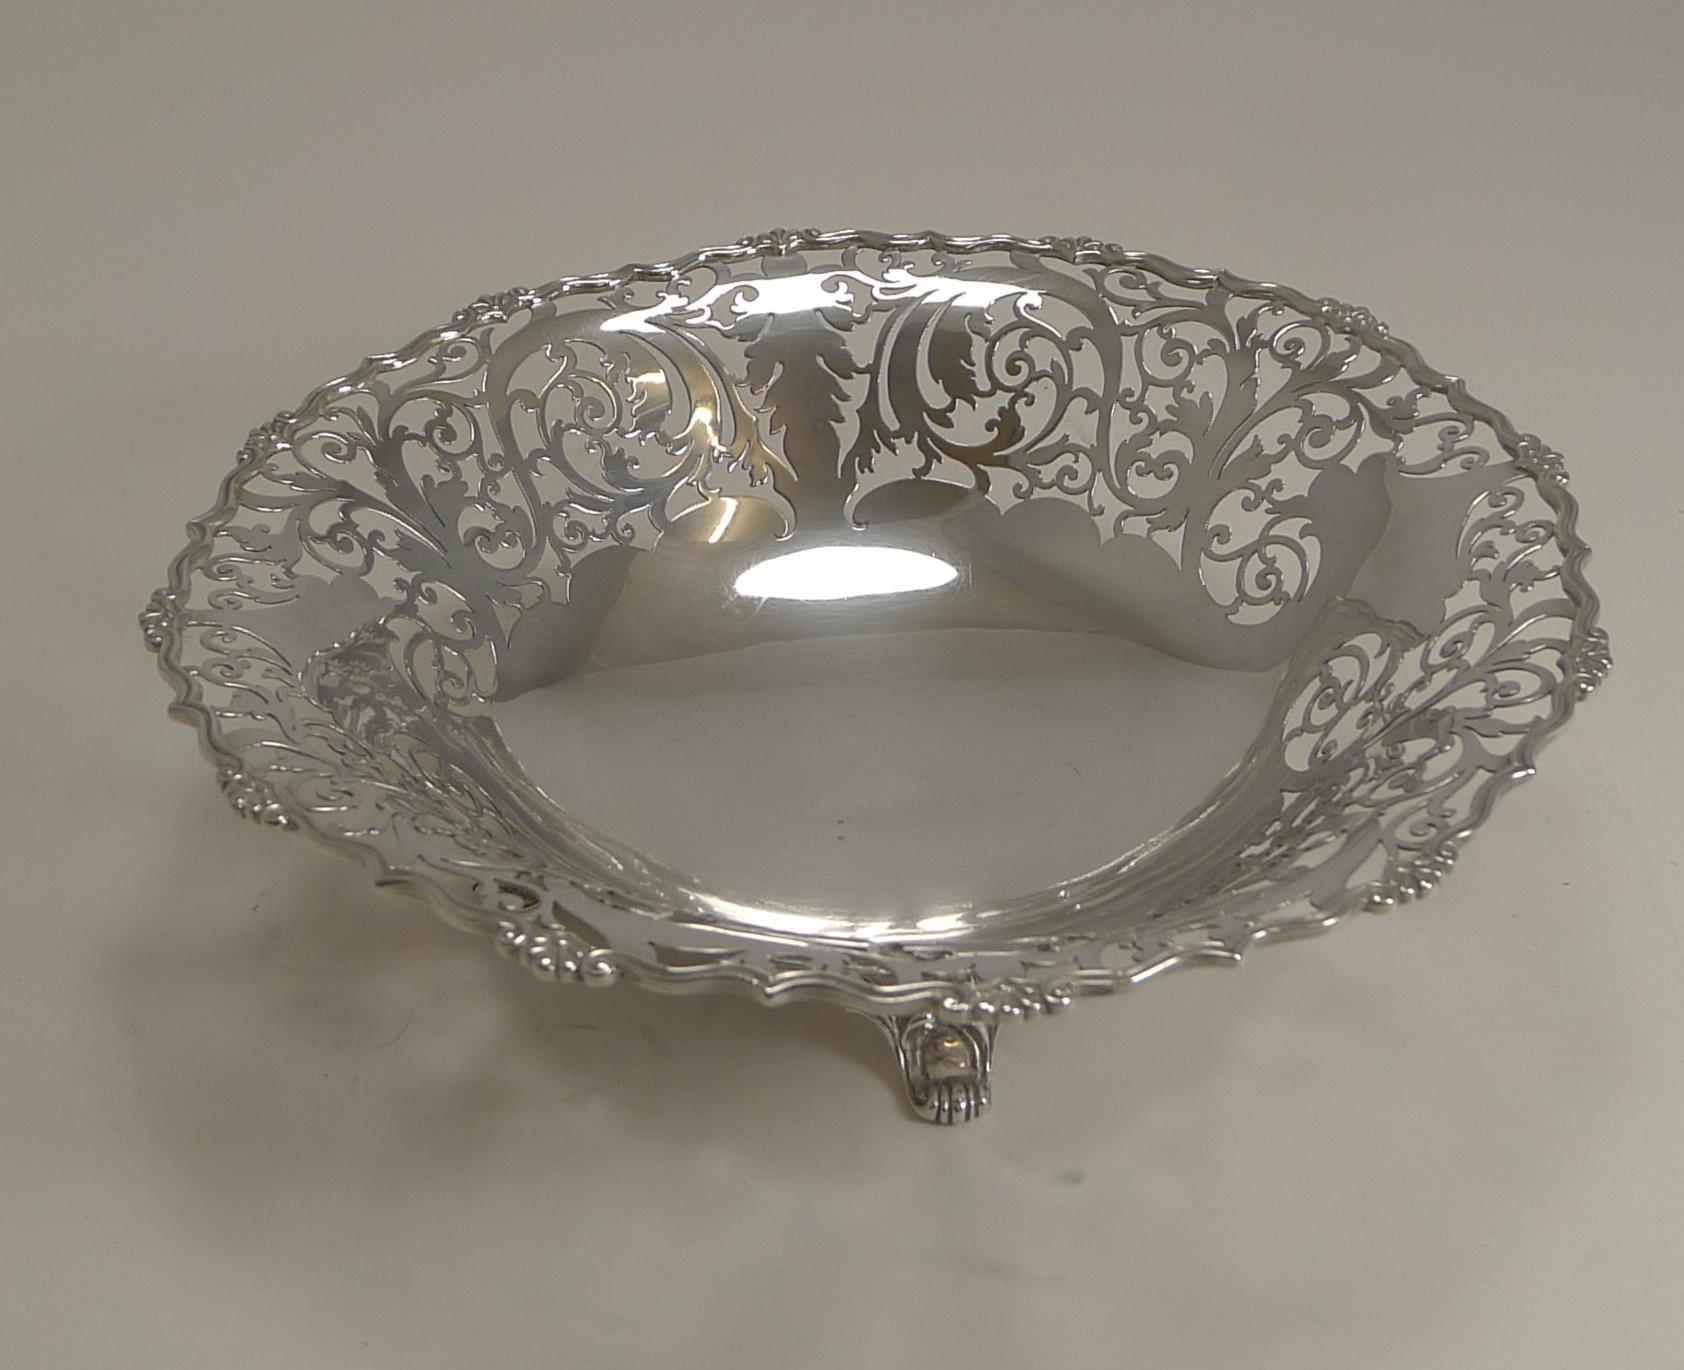 Early 20th Century English Sterling Silver Fruit Basket or Dish by Mappin and Webb, 1929